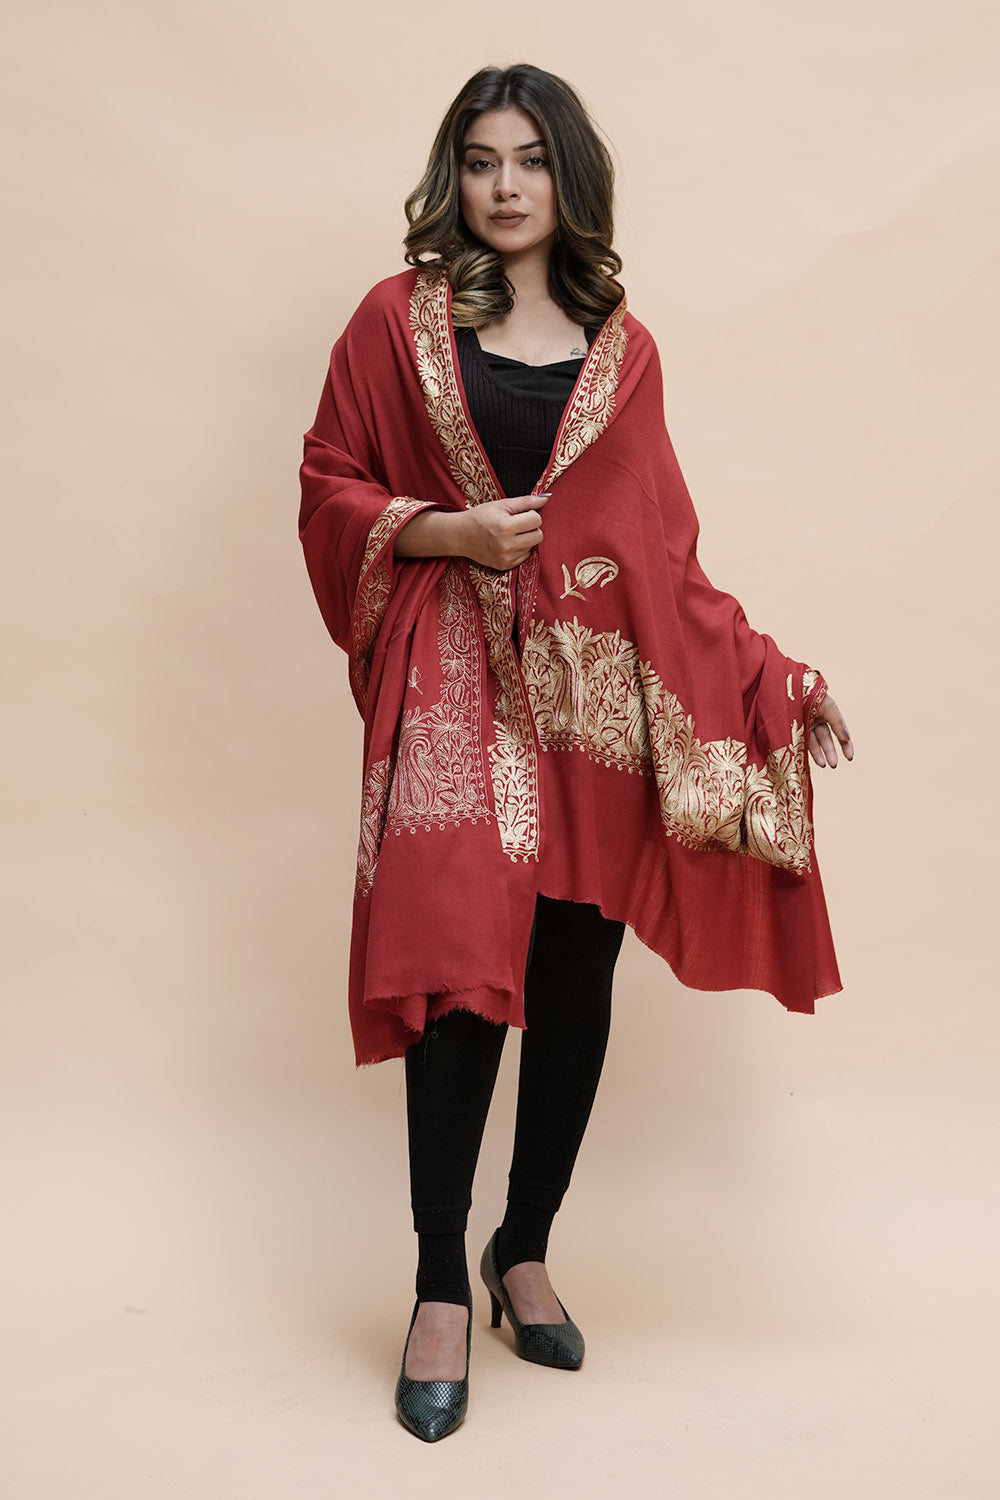 Maroon Colour Semi Pashmina Shawl Enriched With Ethnic